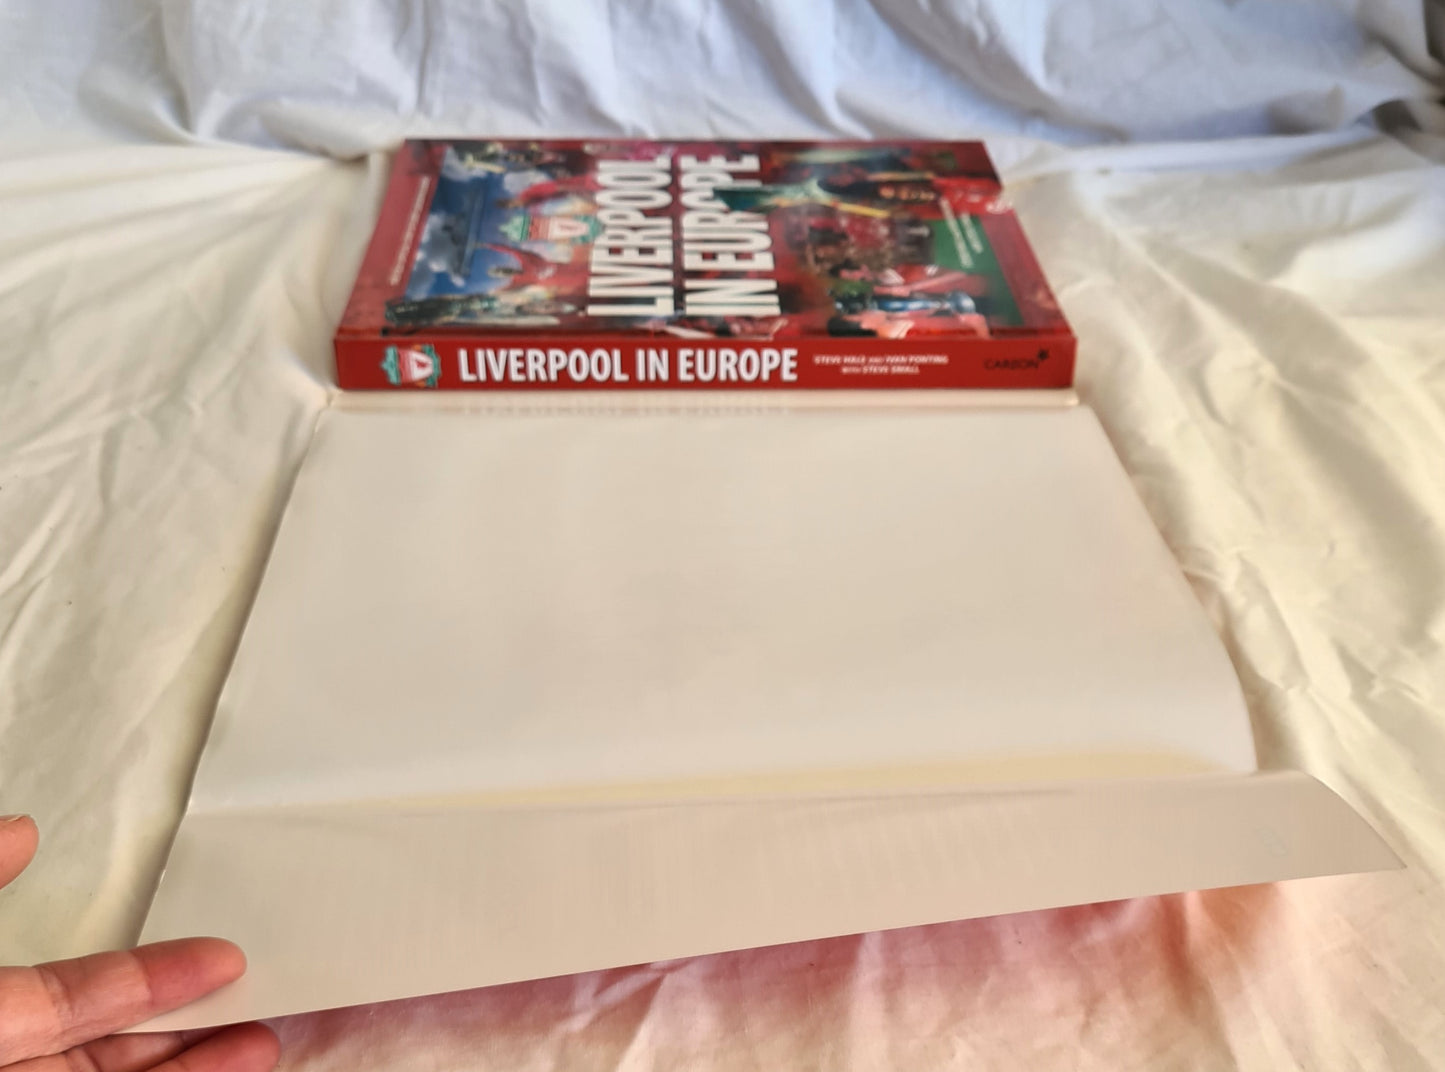 Liverpool in Europe by Steve Hale and Ivan Ponting with Steve Small